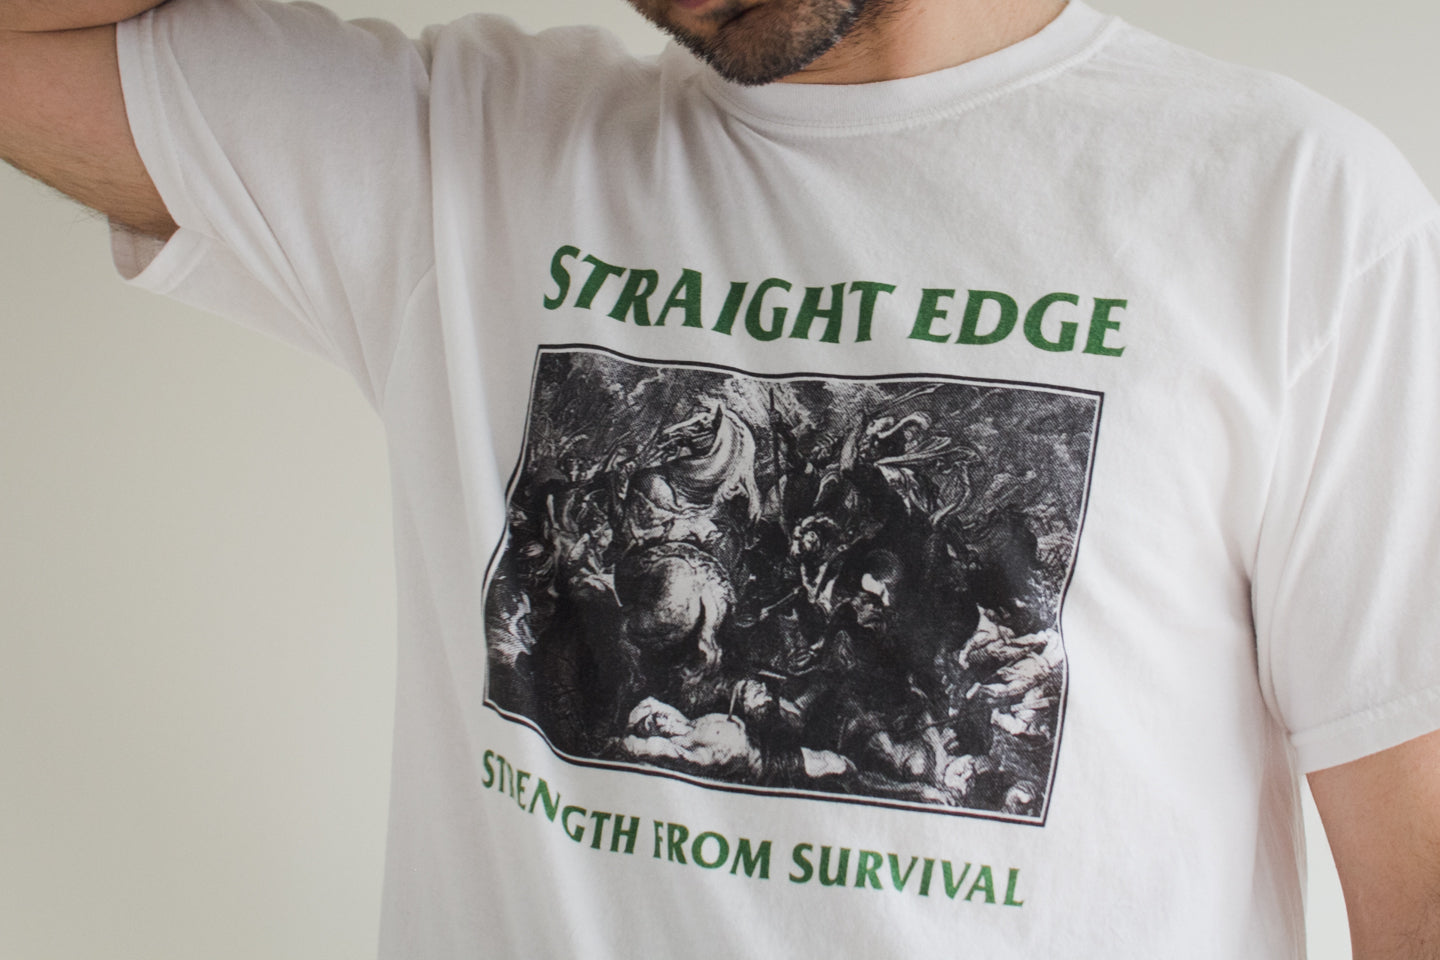 Strength From Survival Tee